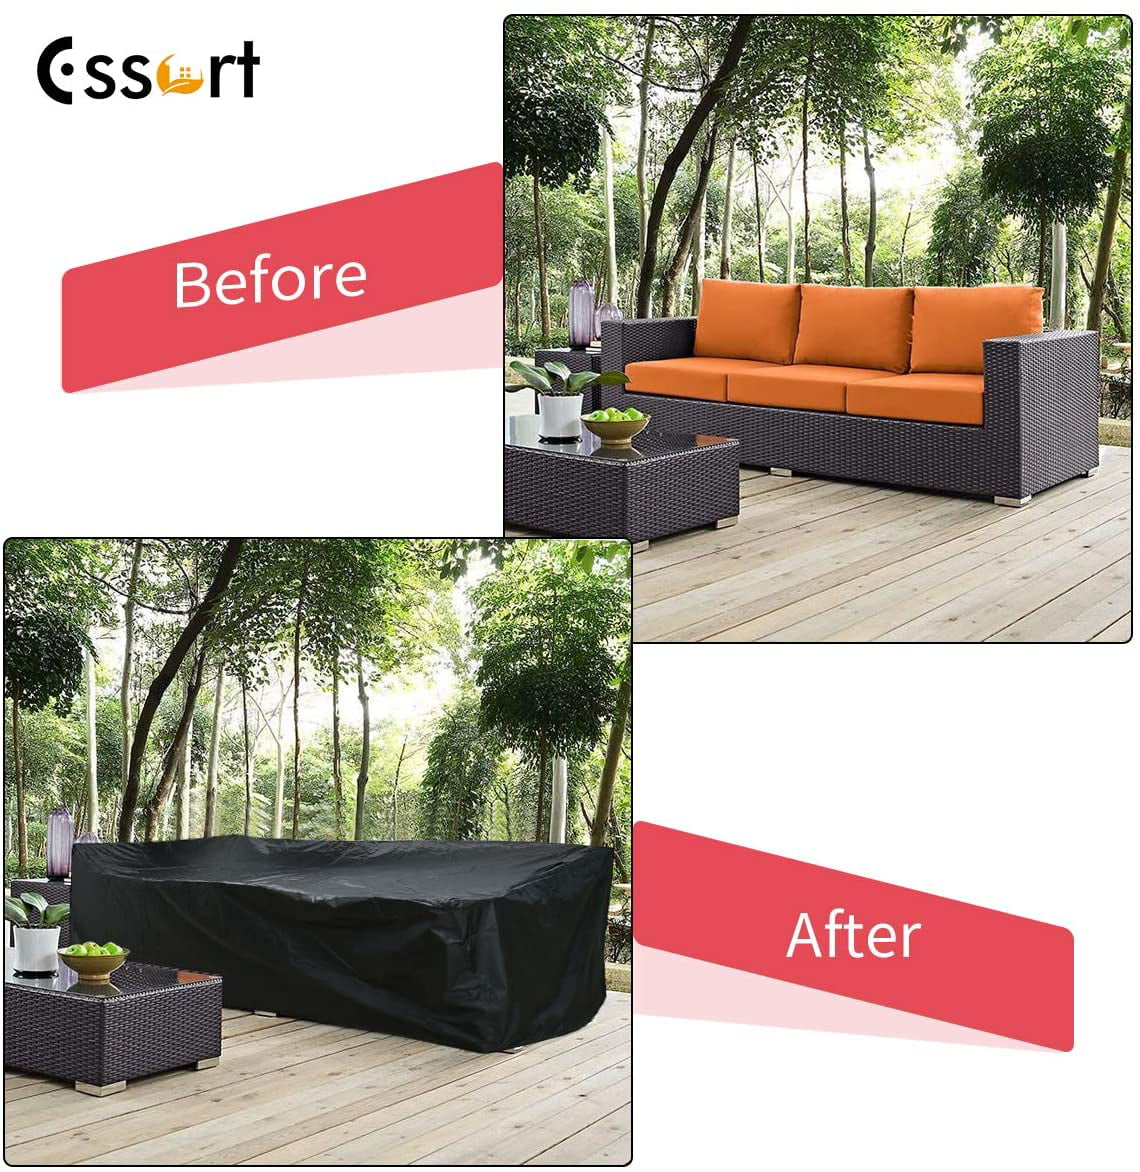 Details about   Essort Patio Furniture Covers Extra Large Outdoor Furniture Set Covers Waterpro 